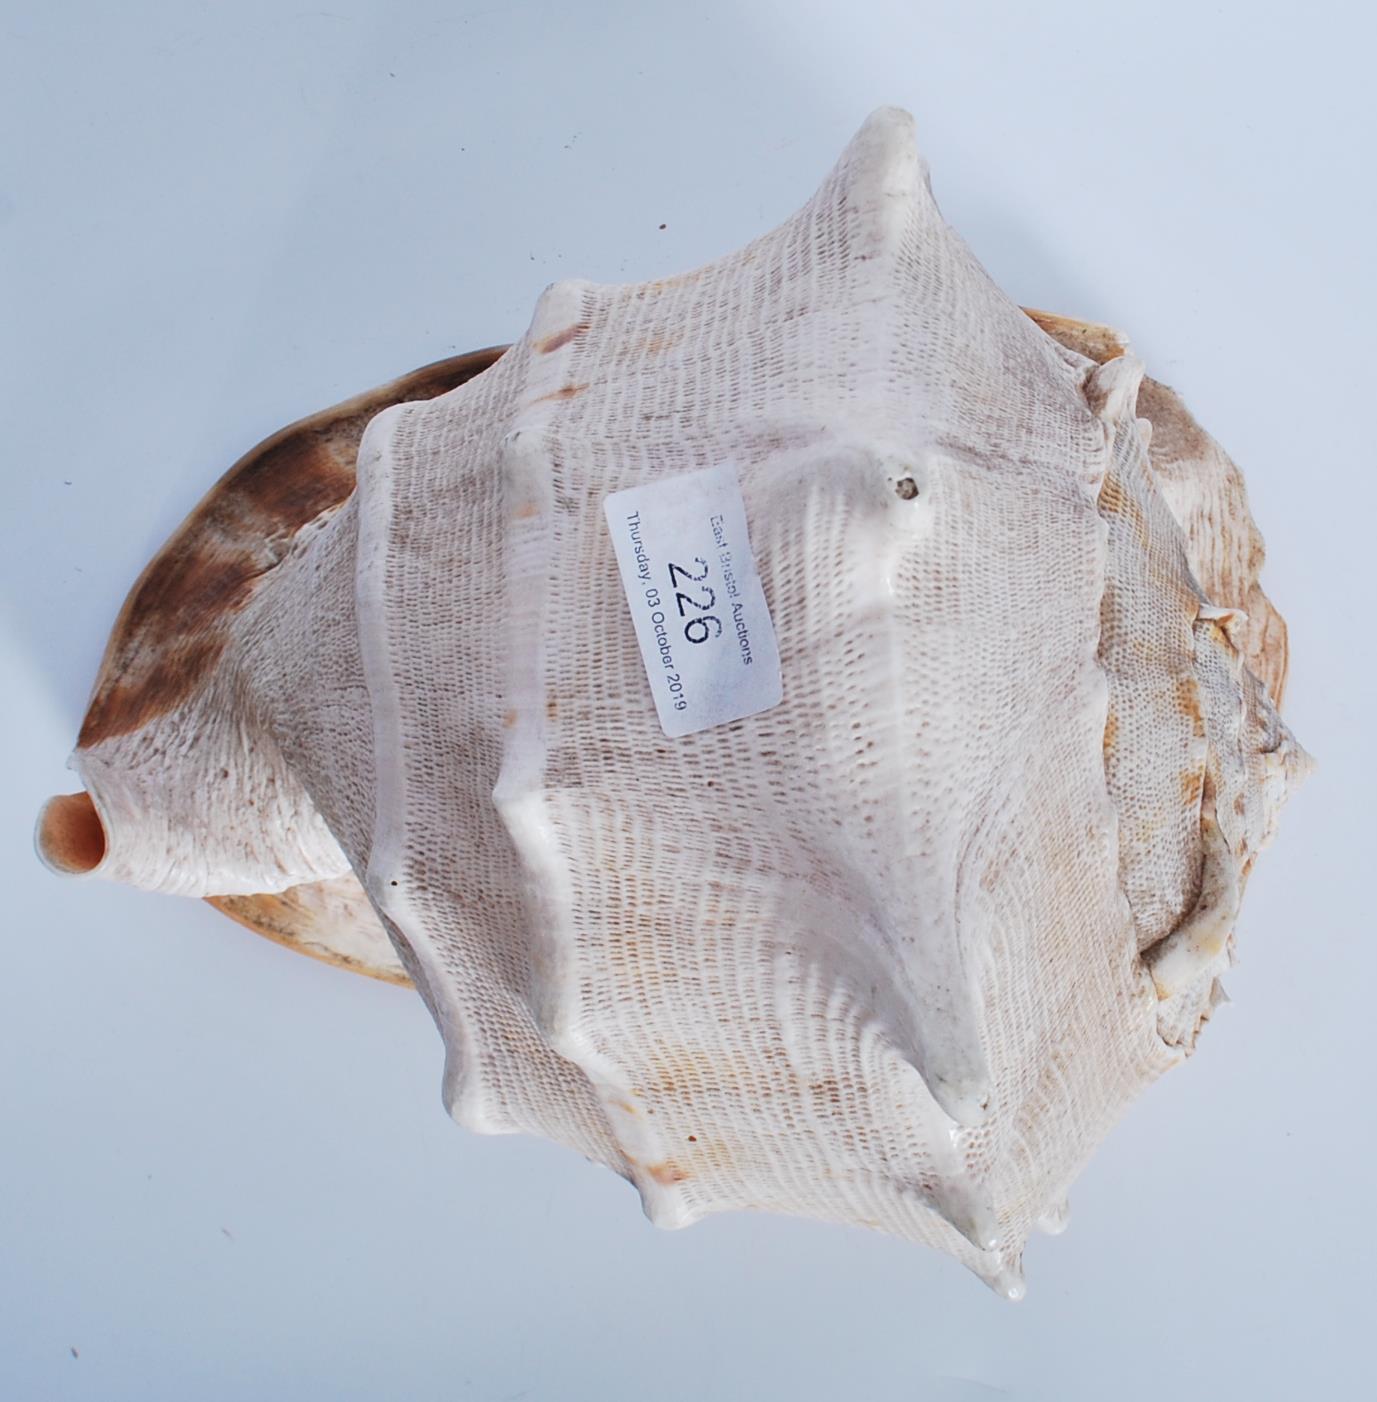 Strombus (Gigas) Lobatus; a Giant Conch shell meas - Image 5 of 6